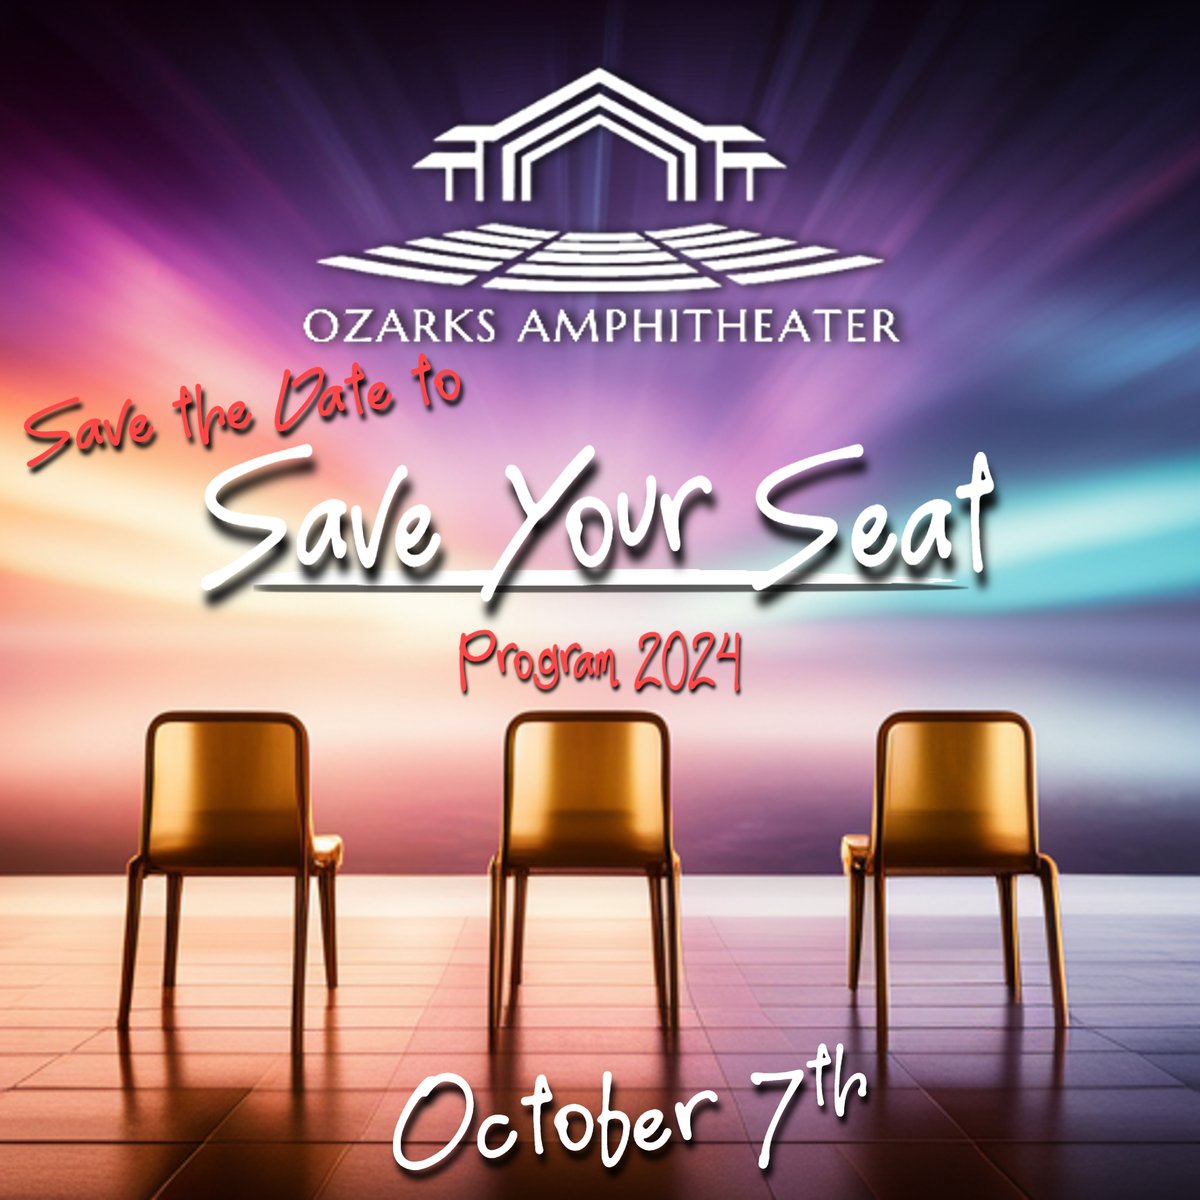 Make sure to save the date to come to our Save Your Seat Program 2024 on Saturday, October 7th! Find your preferred seat at the Ozarks Amphitheater and reserve the right of first refusal to all of our announced shows for the 2024 Season! Stay tuned for pricing and event info